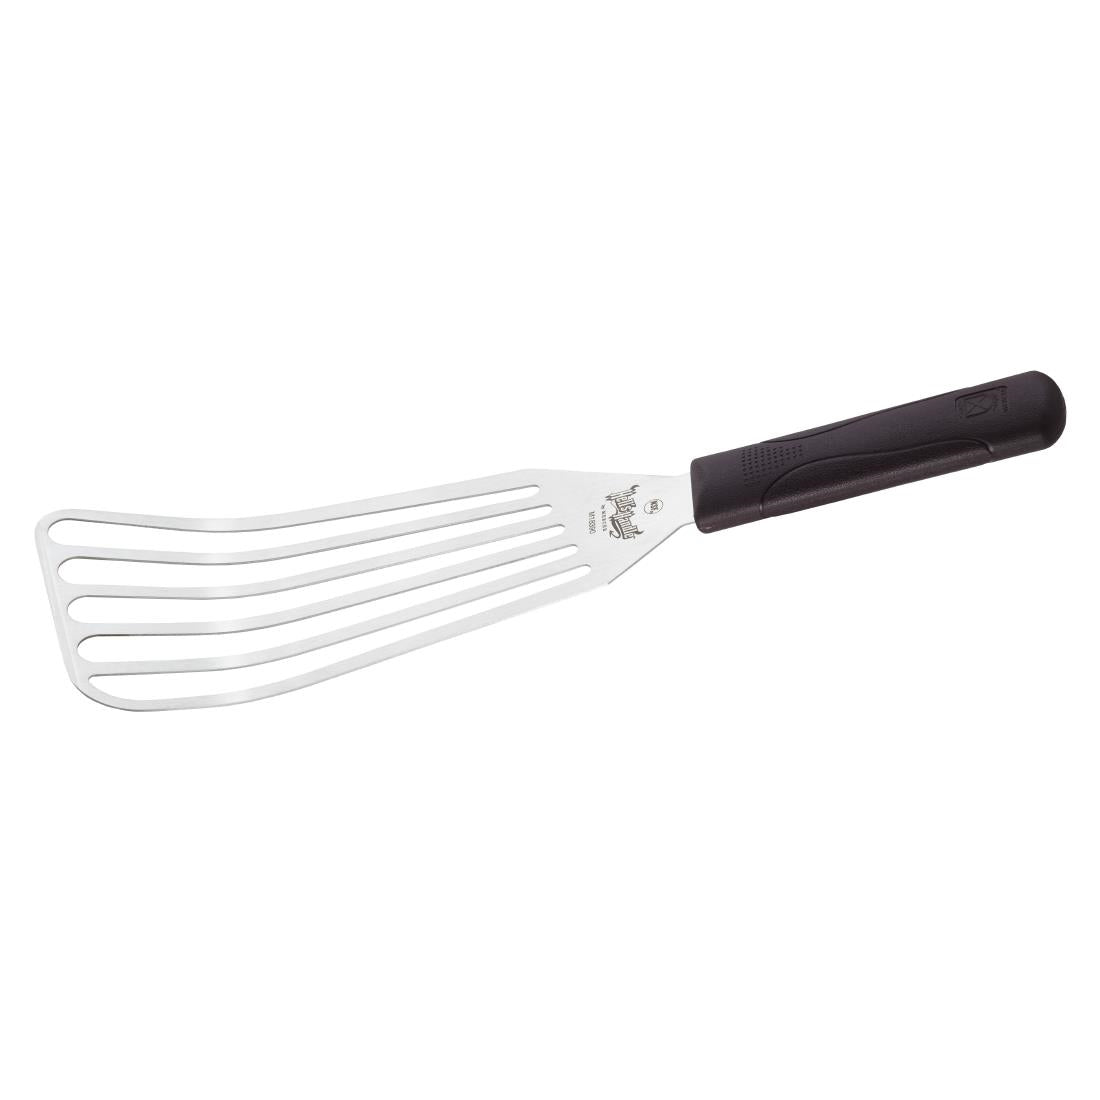 GG731 Mercer Culinary Hells Handle Heat Resistant Fish Turner Large JD Catering Equipment Solutions Ltd